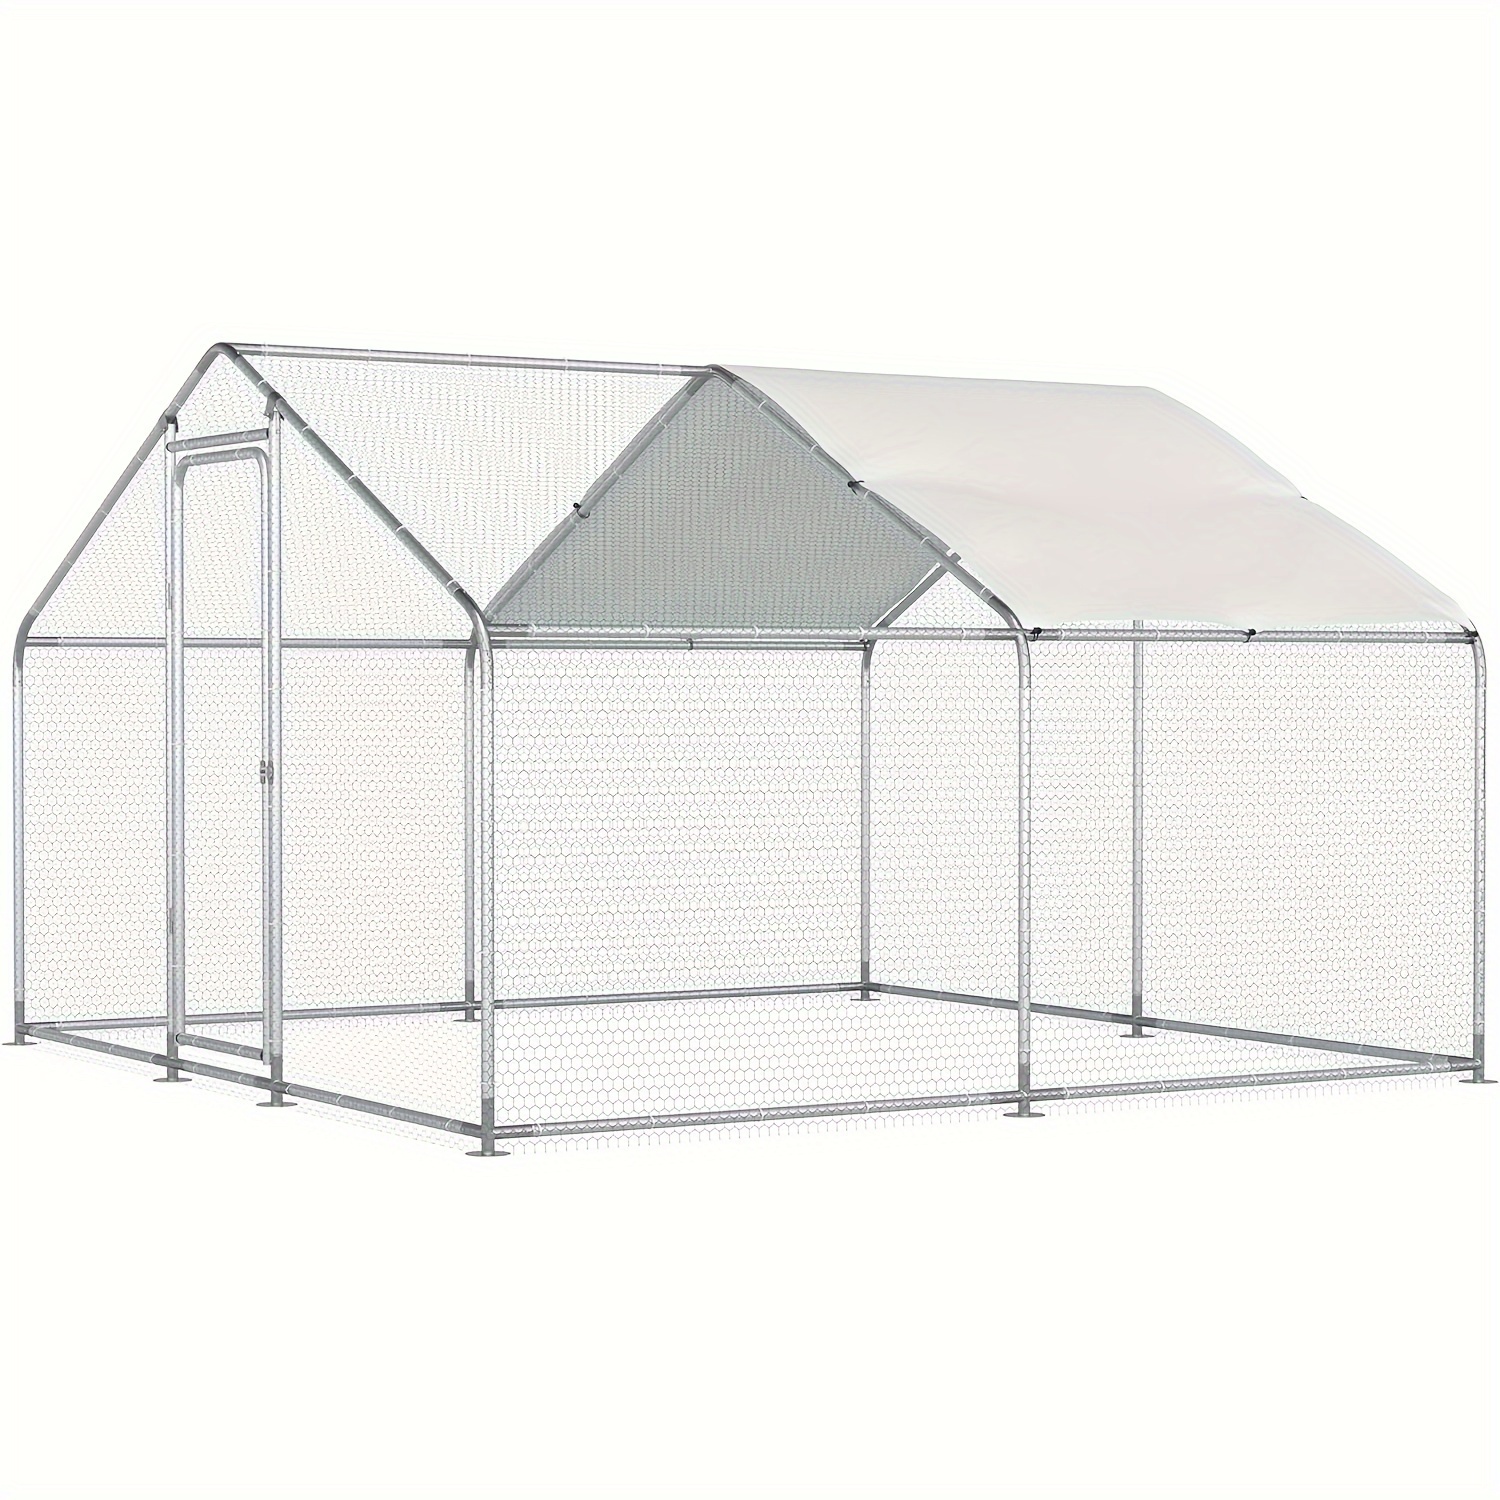 

Large Metal Chicken Coop, 9.84 X 9.84 X 6.46 Ft, Outdoor Poultry Cage With Cover For Chicken, Duck, Rabbit, Weatherproof Steel Pet Enclosure, Farm With Secure Locking System